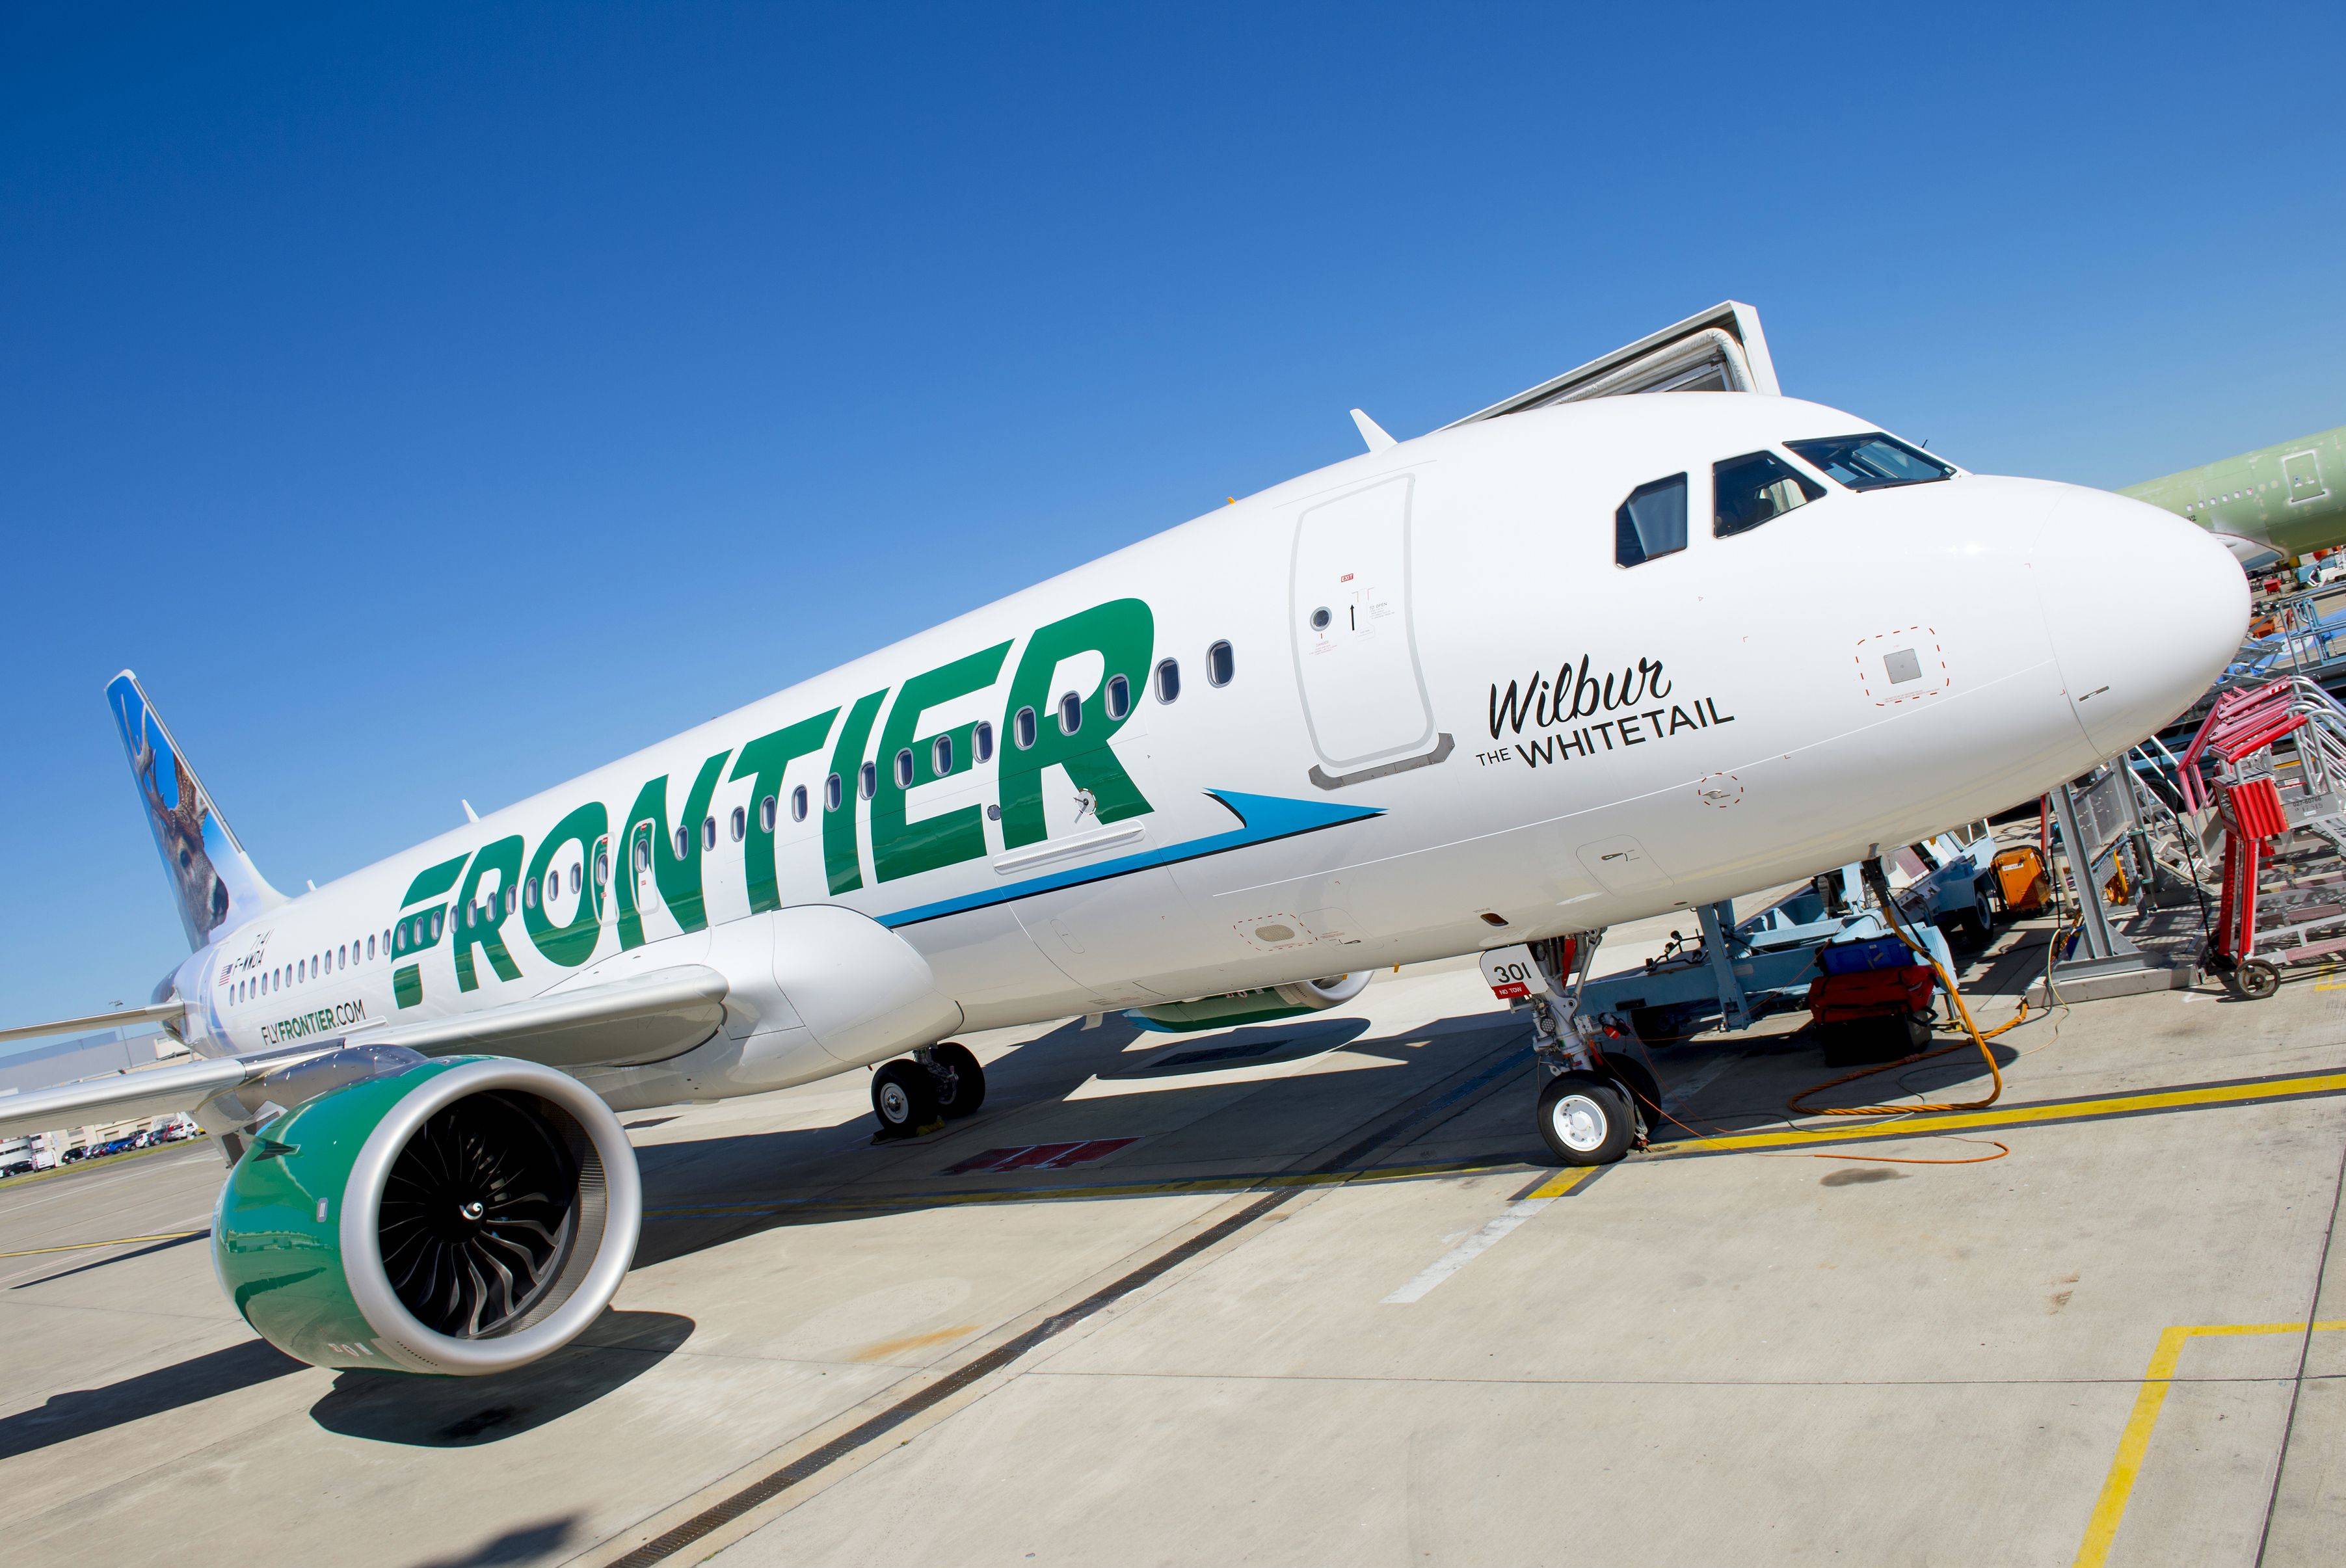 A Frontier Airlines Airbus A320neo aircraft. (Image courtesy of Airbus)